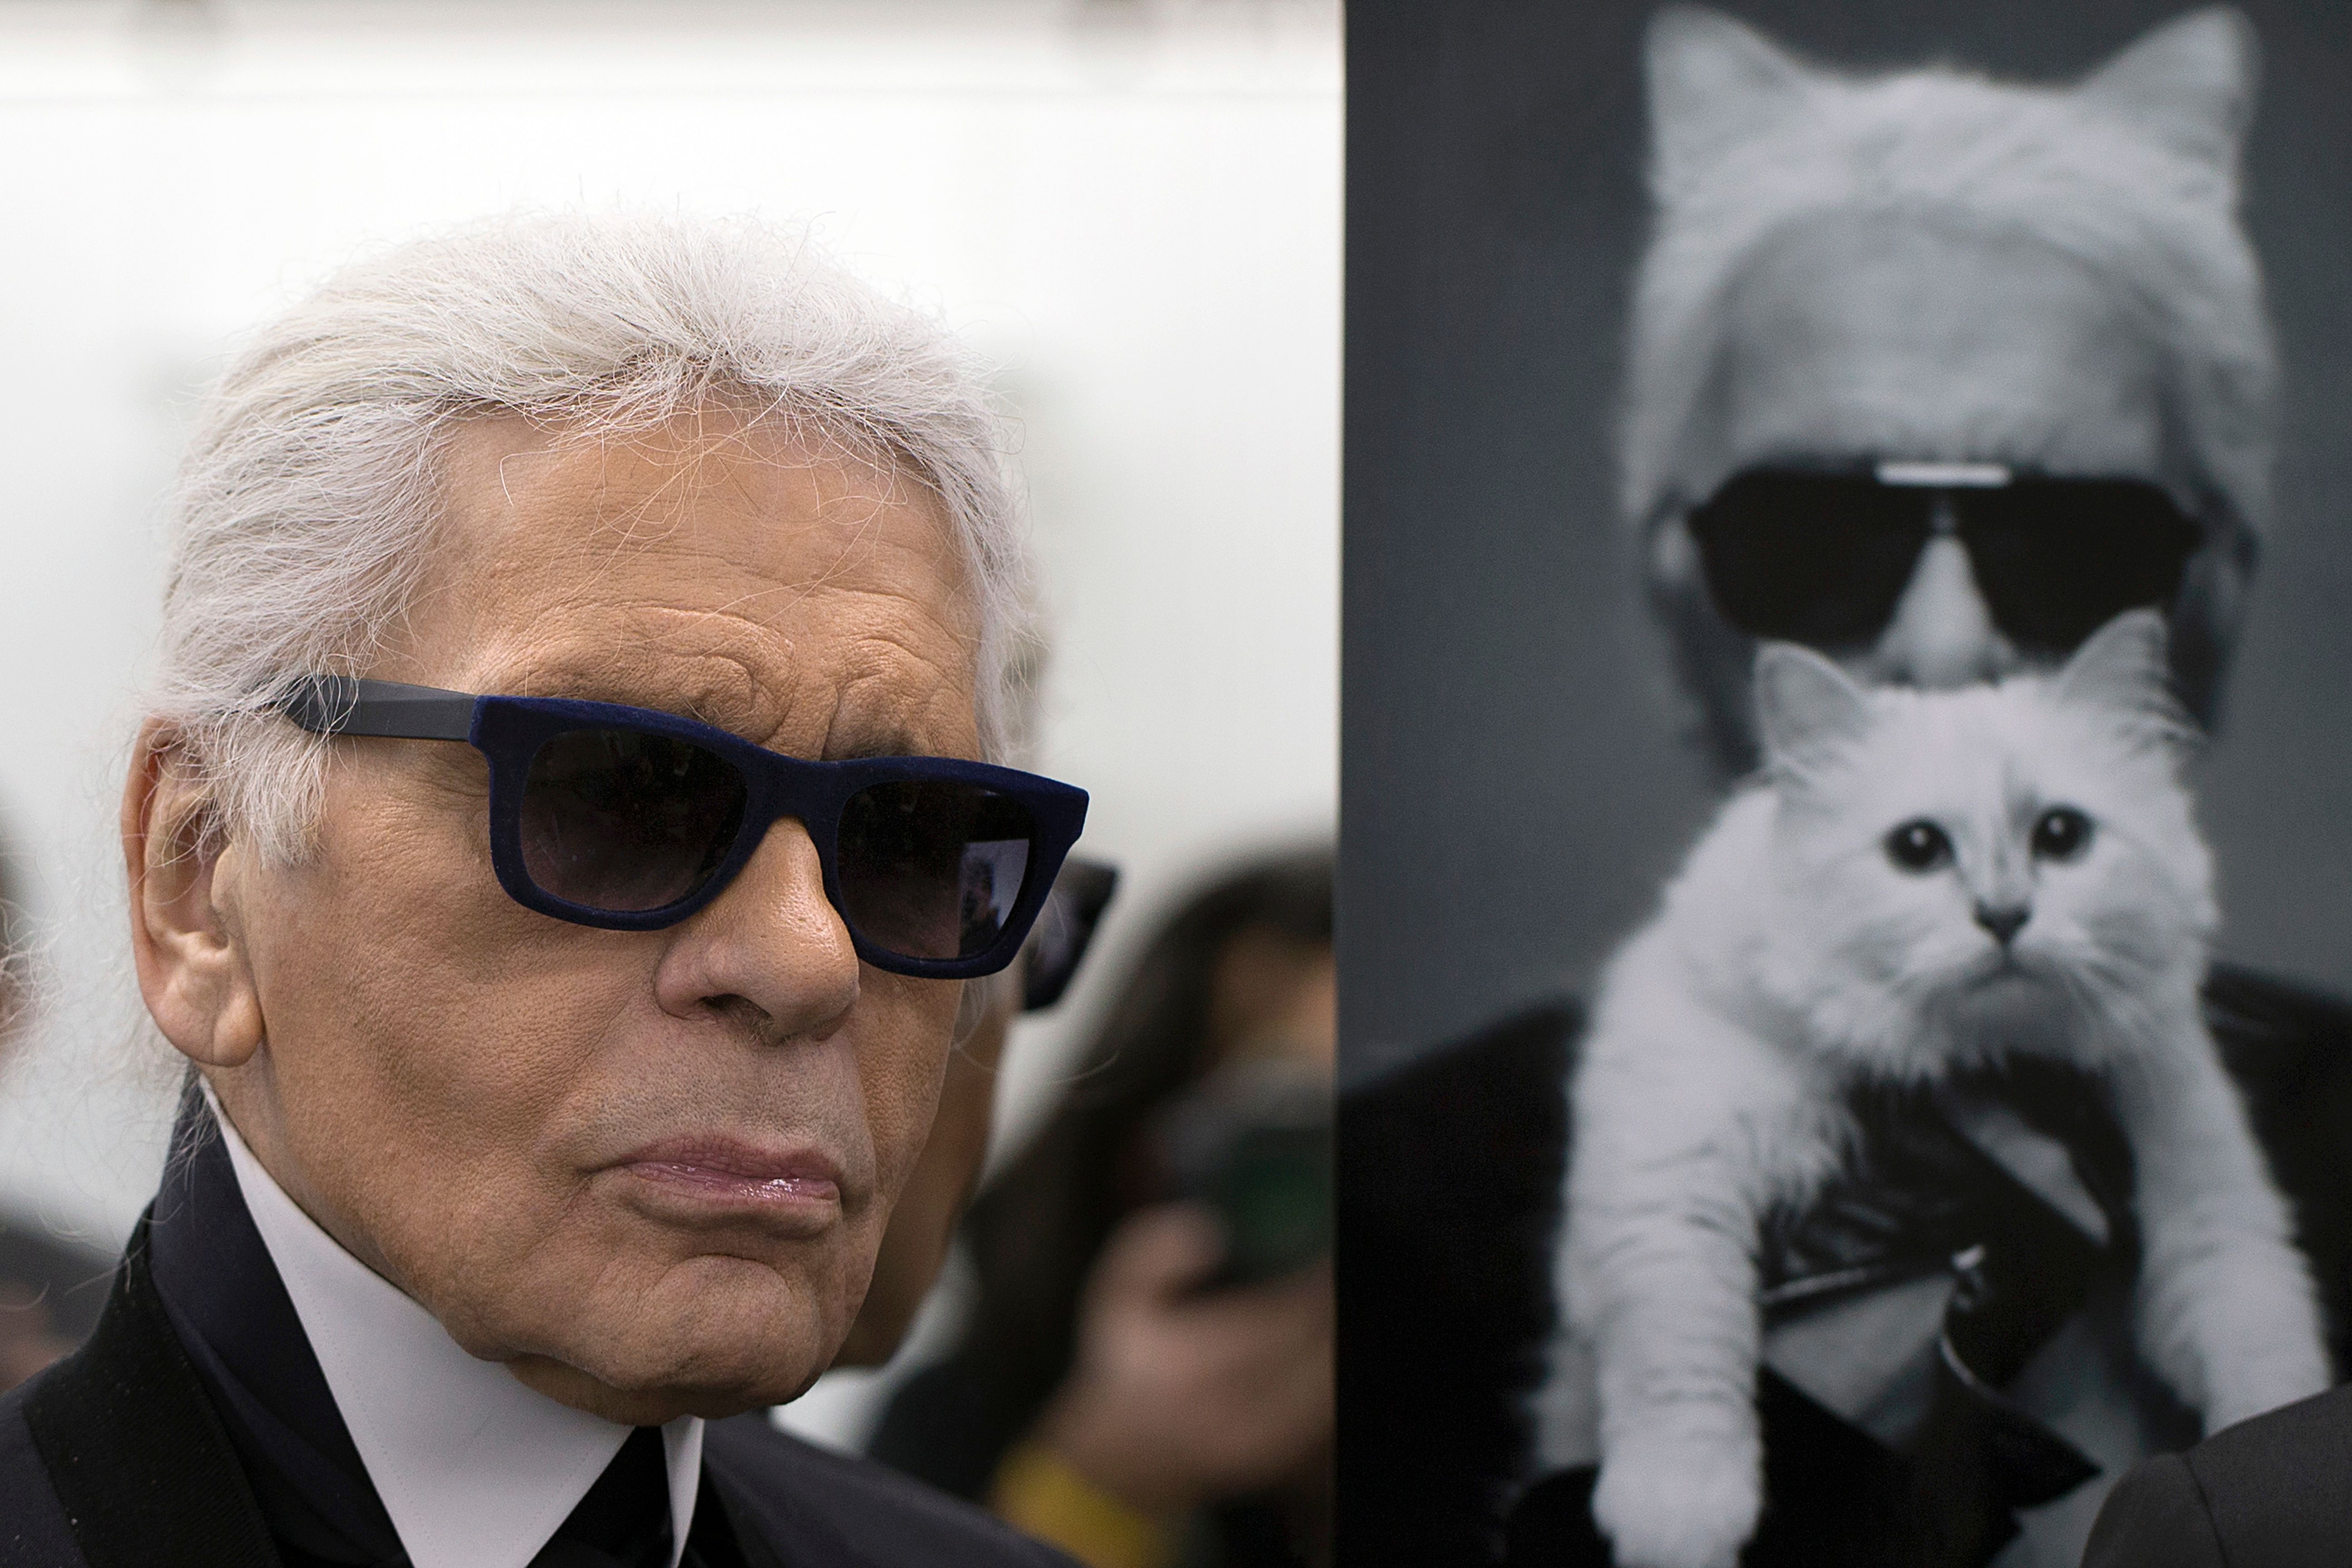 German fashion designer Karl Lagerfeld poses next to a photo of himself and his cat Choupette during a visit to the workshops that work for Chanel in Pantin, Paris, on February 7, 2014. | Source: Getty Images